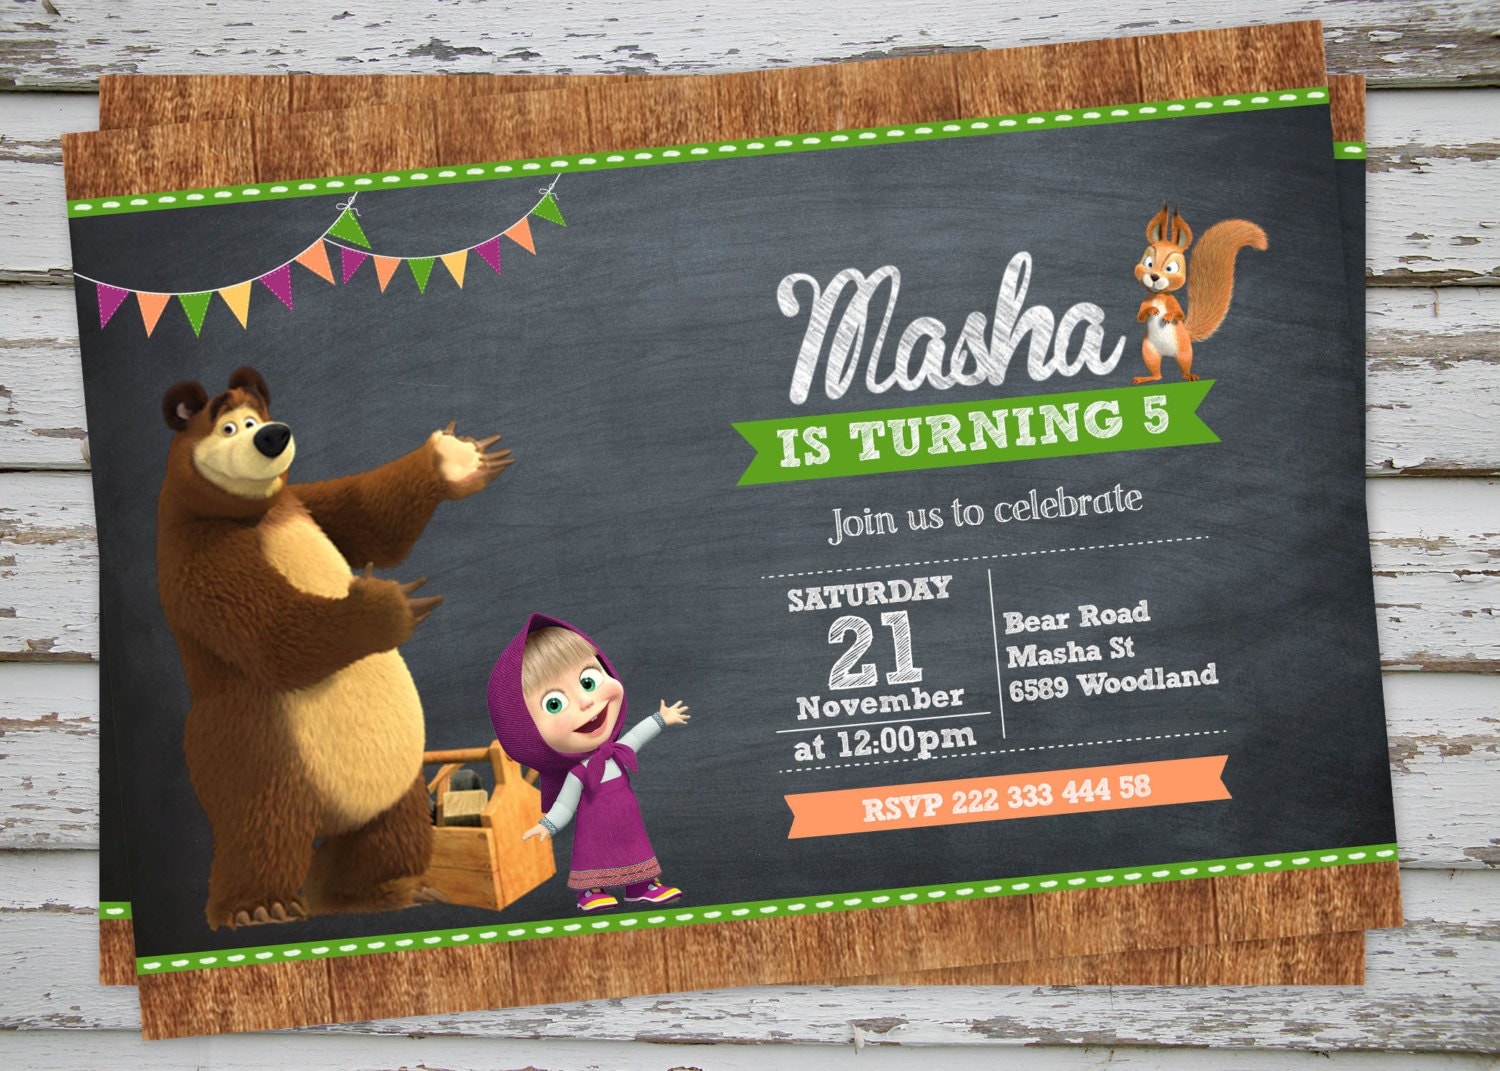 Masha And The Bear Invitation Masha And The Bear Birthday Party Images And Photos Finder 